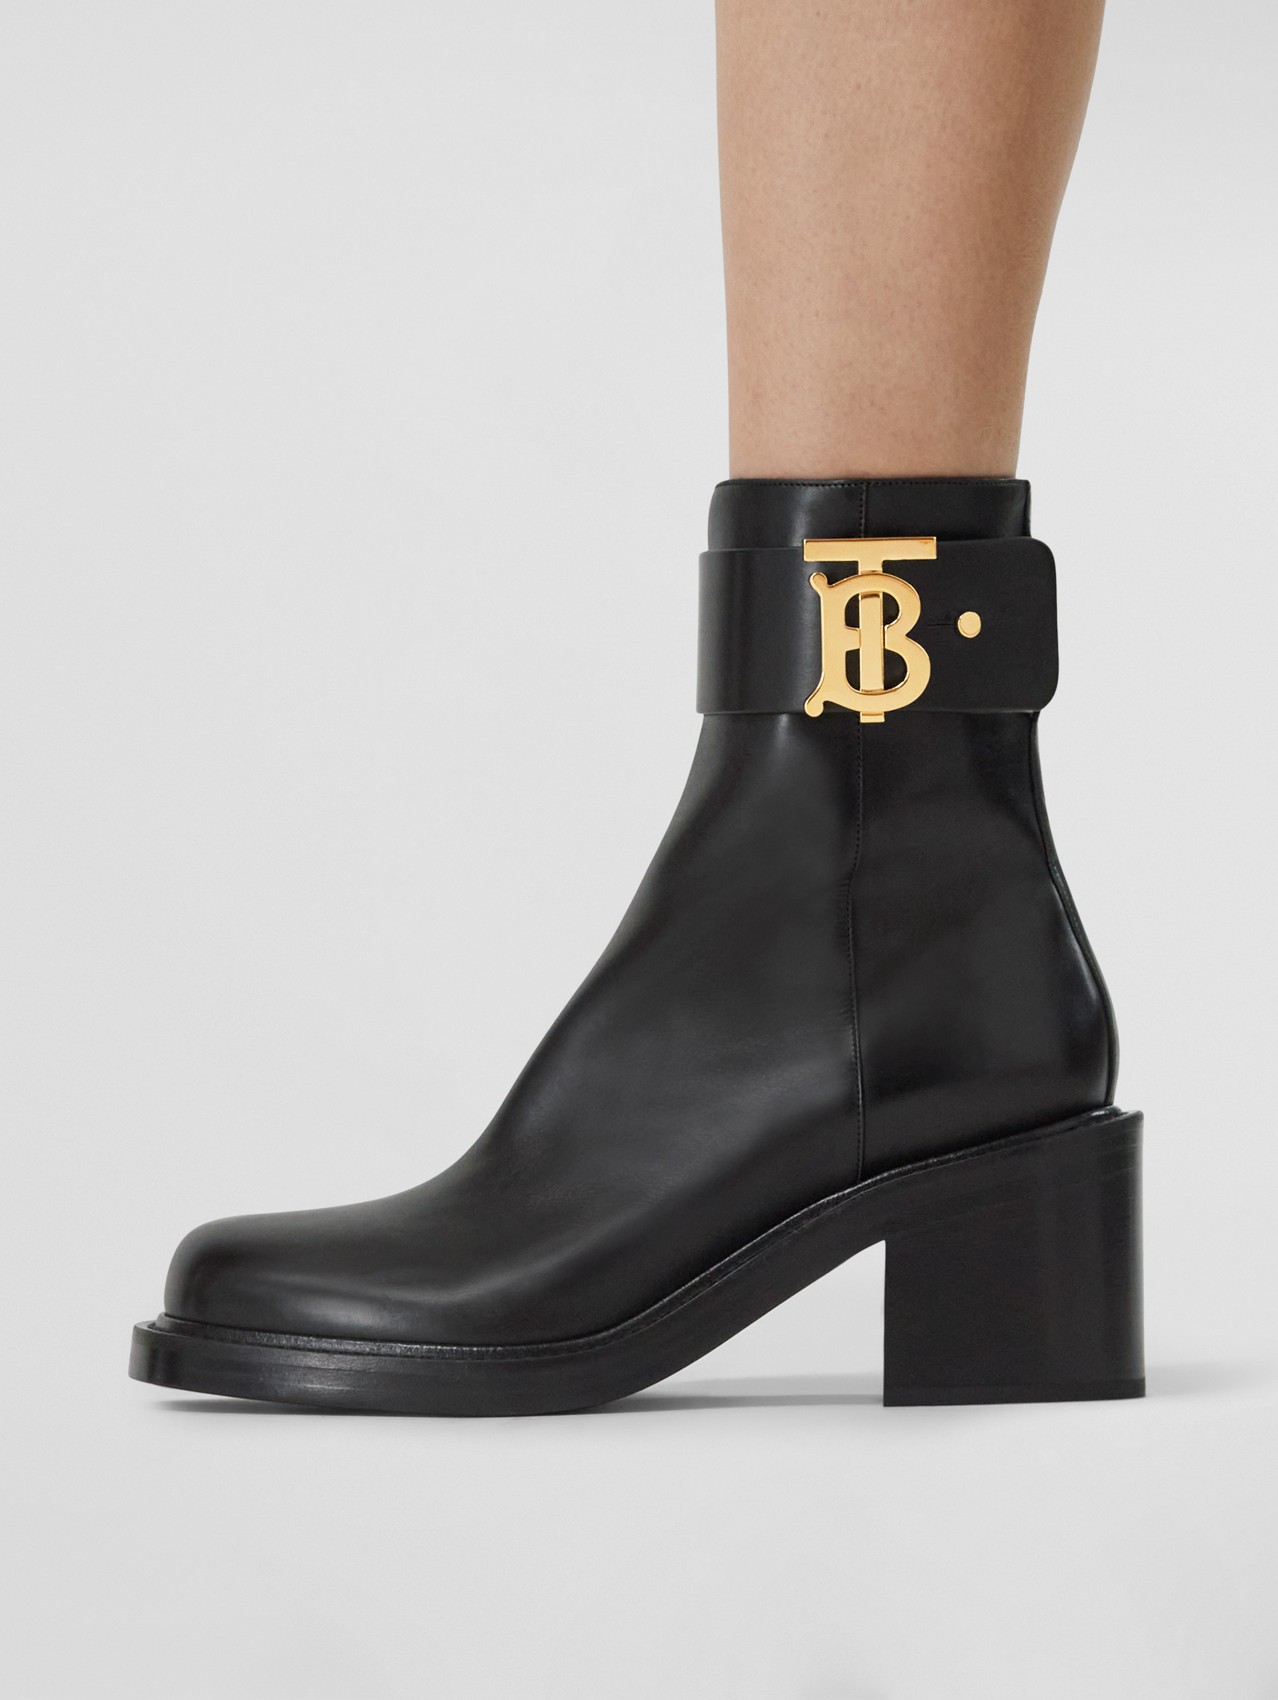 Women's Designer Boots | Ankle & Knee-high Boots | Burberry 